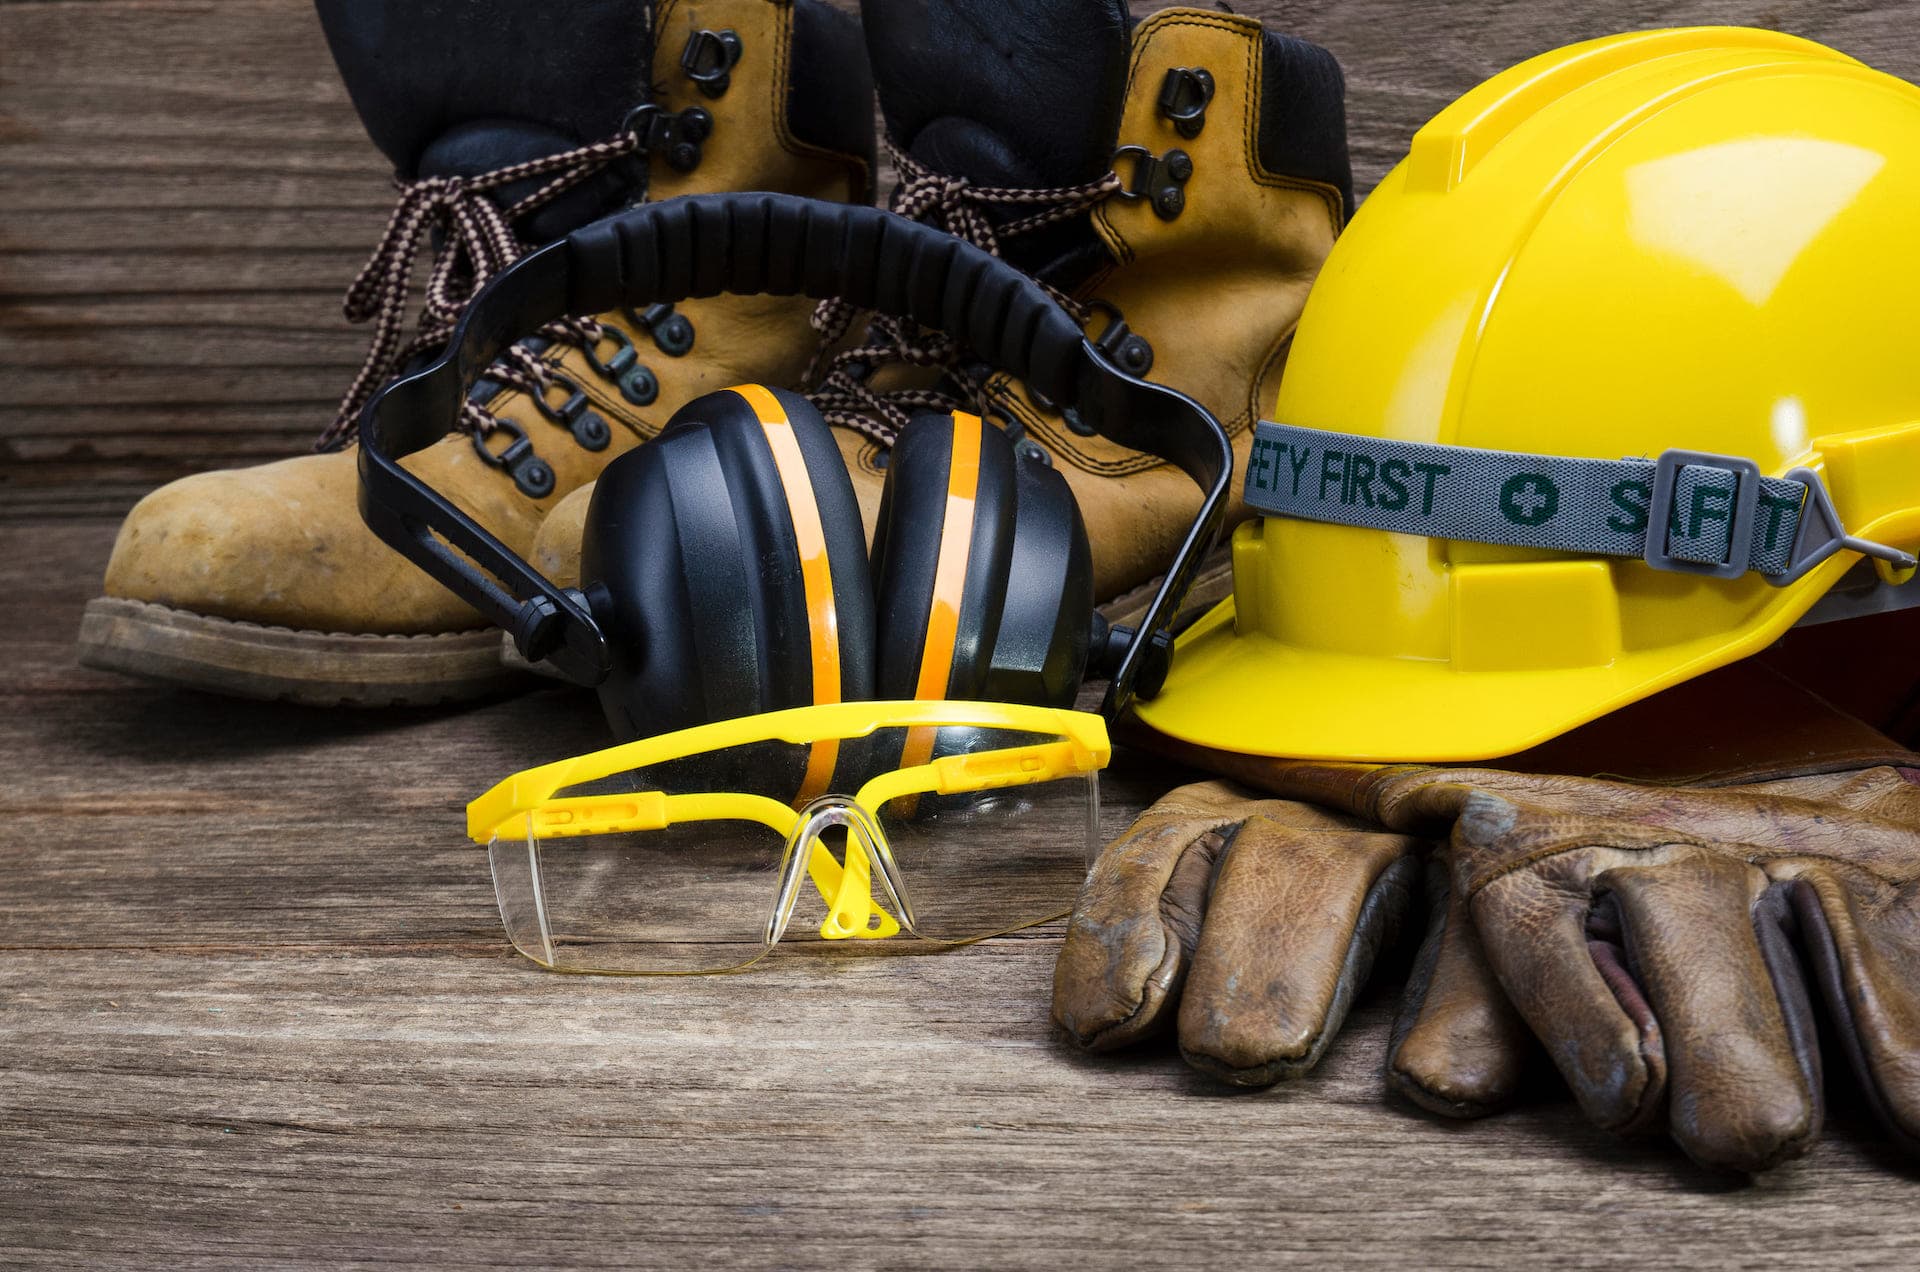 Australia's Mining Industry and Its Need for PPE